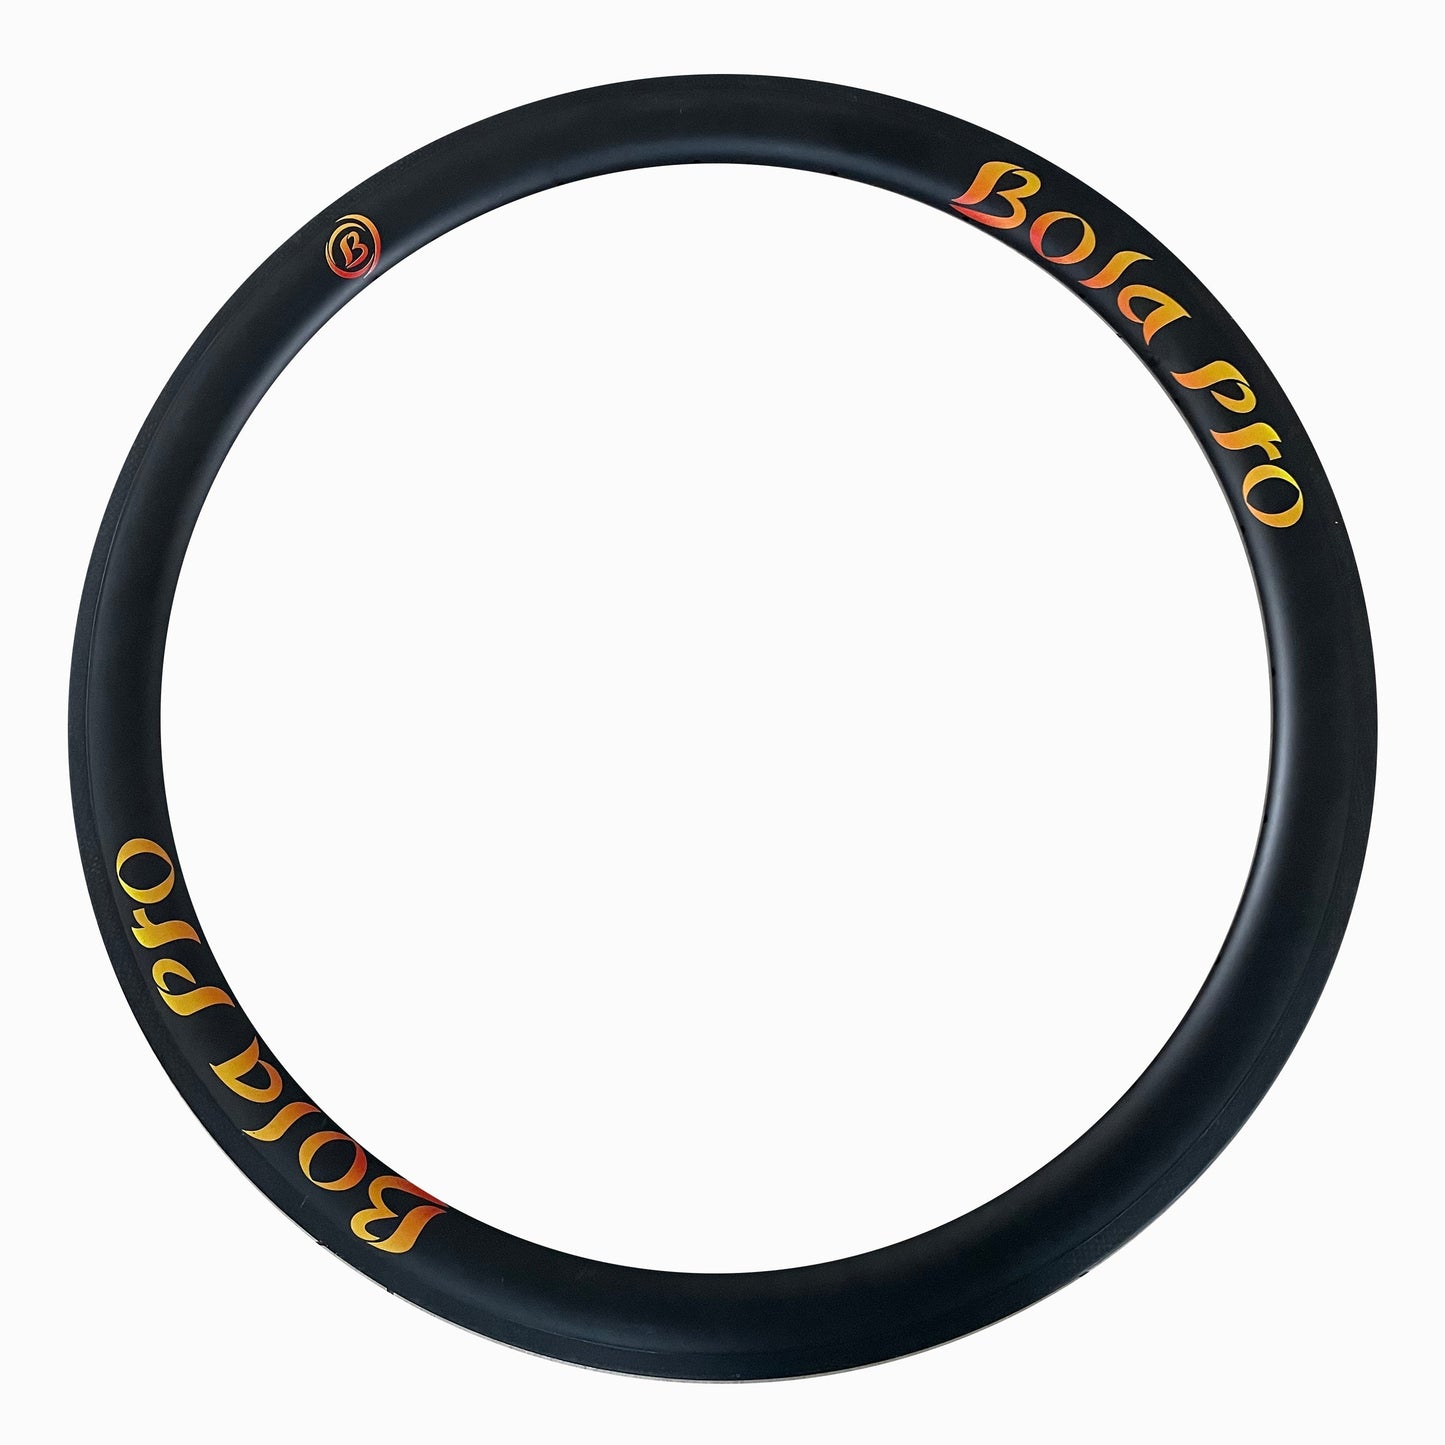 29 inch offset carbon mountain bicycle rim 23mm high 30mm inner wide for cross-country or AM biker Bola